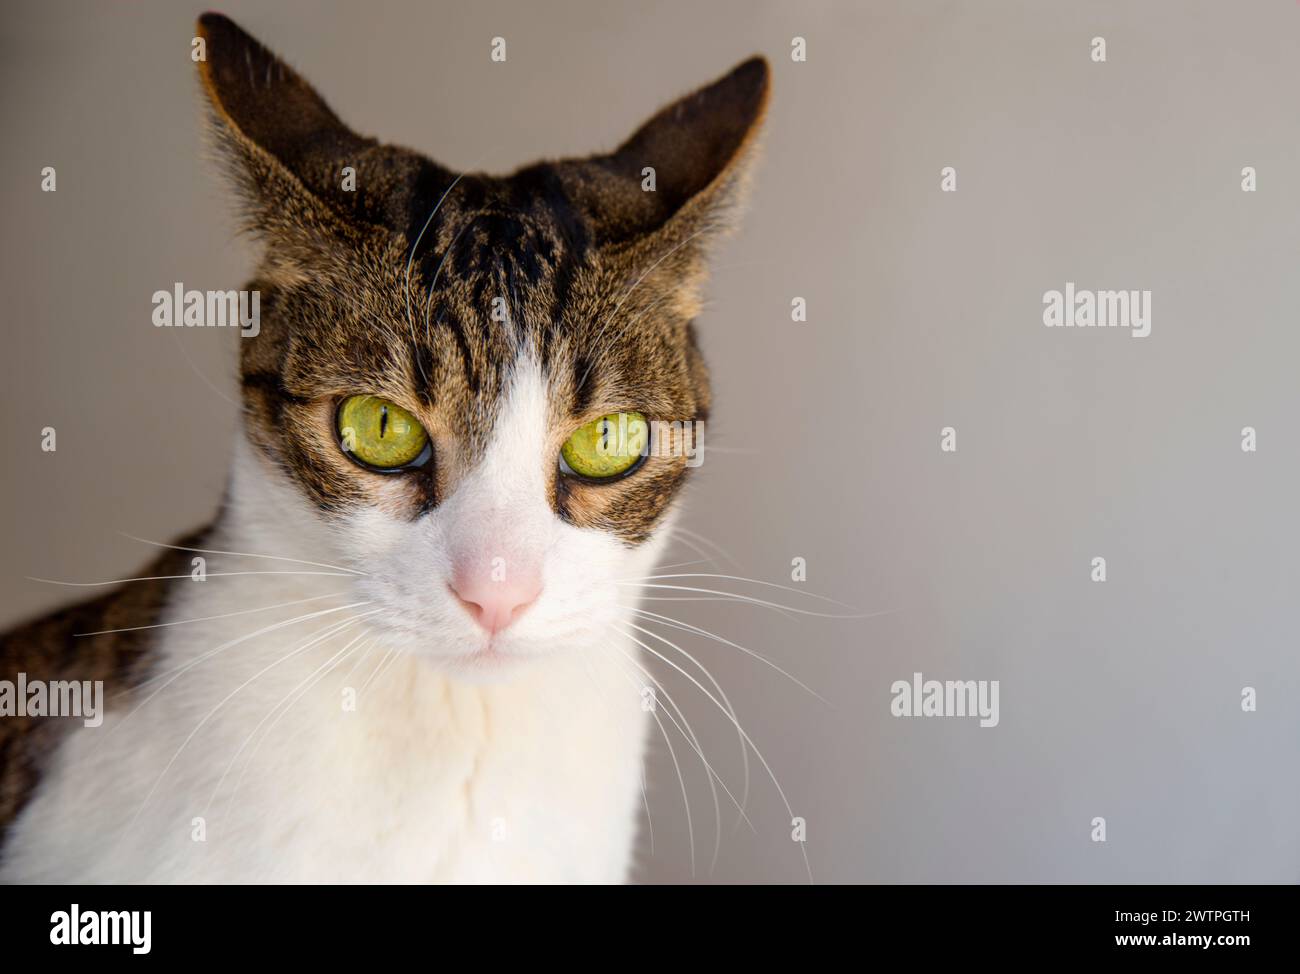 Portrait of tabby and white cat, looking puzzled. Stock Photo